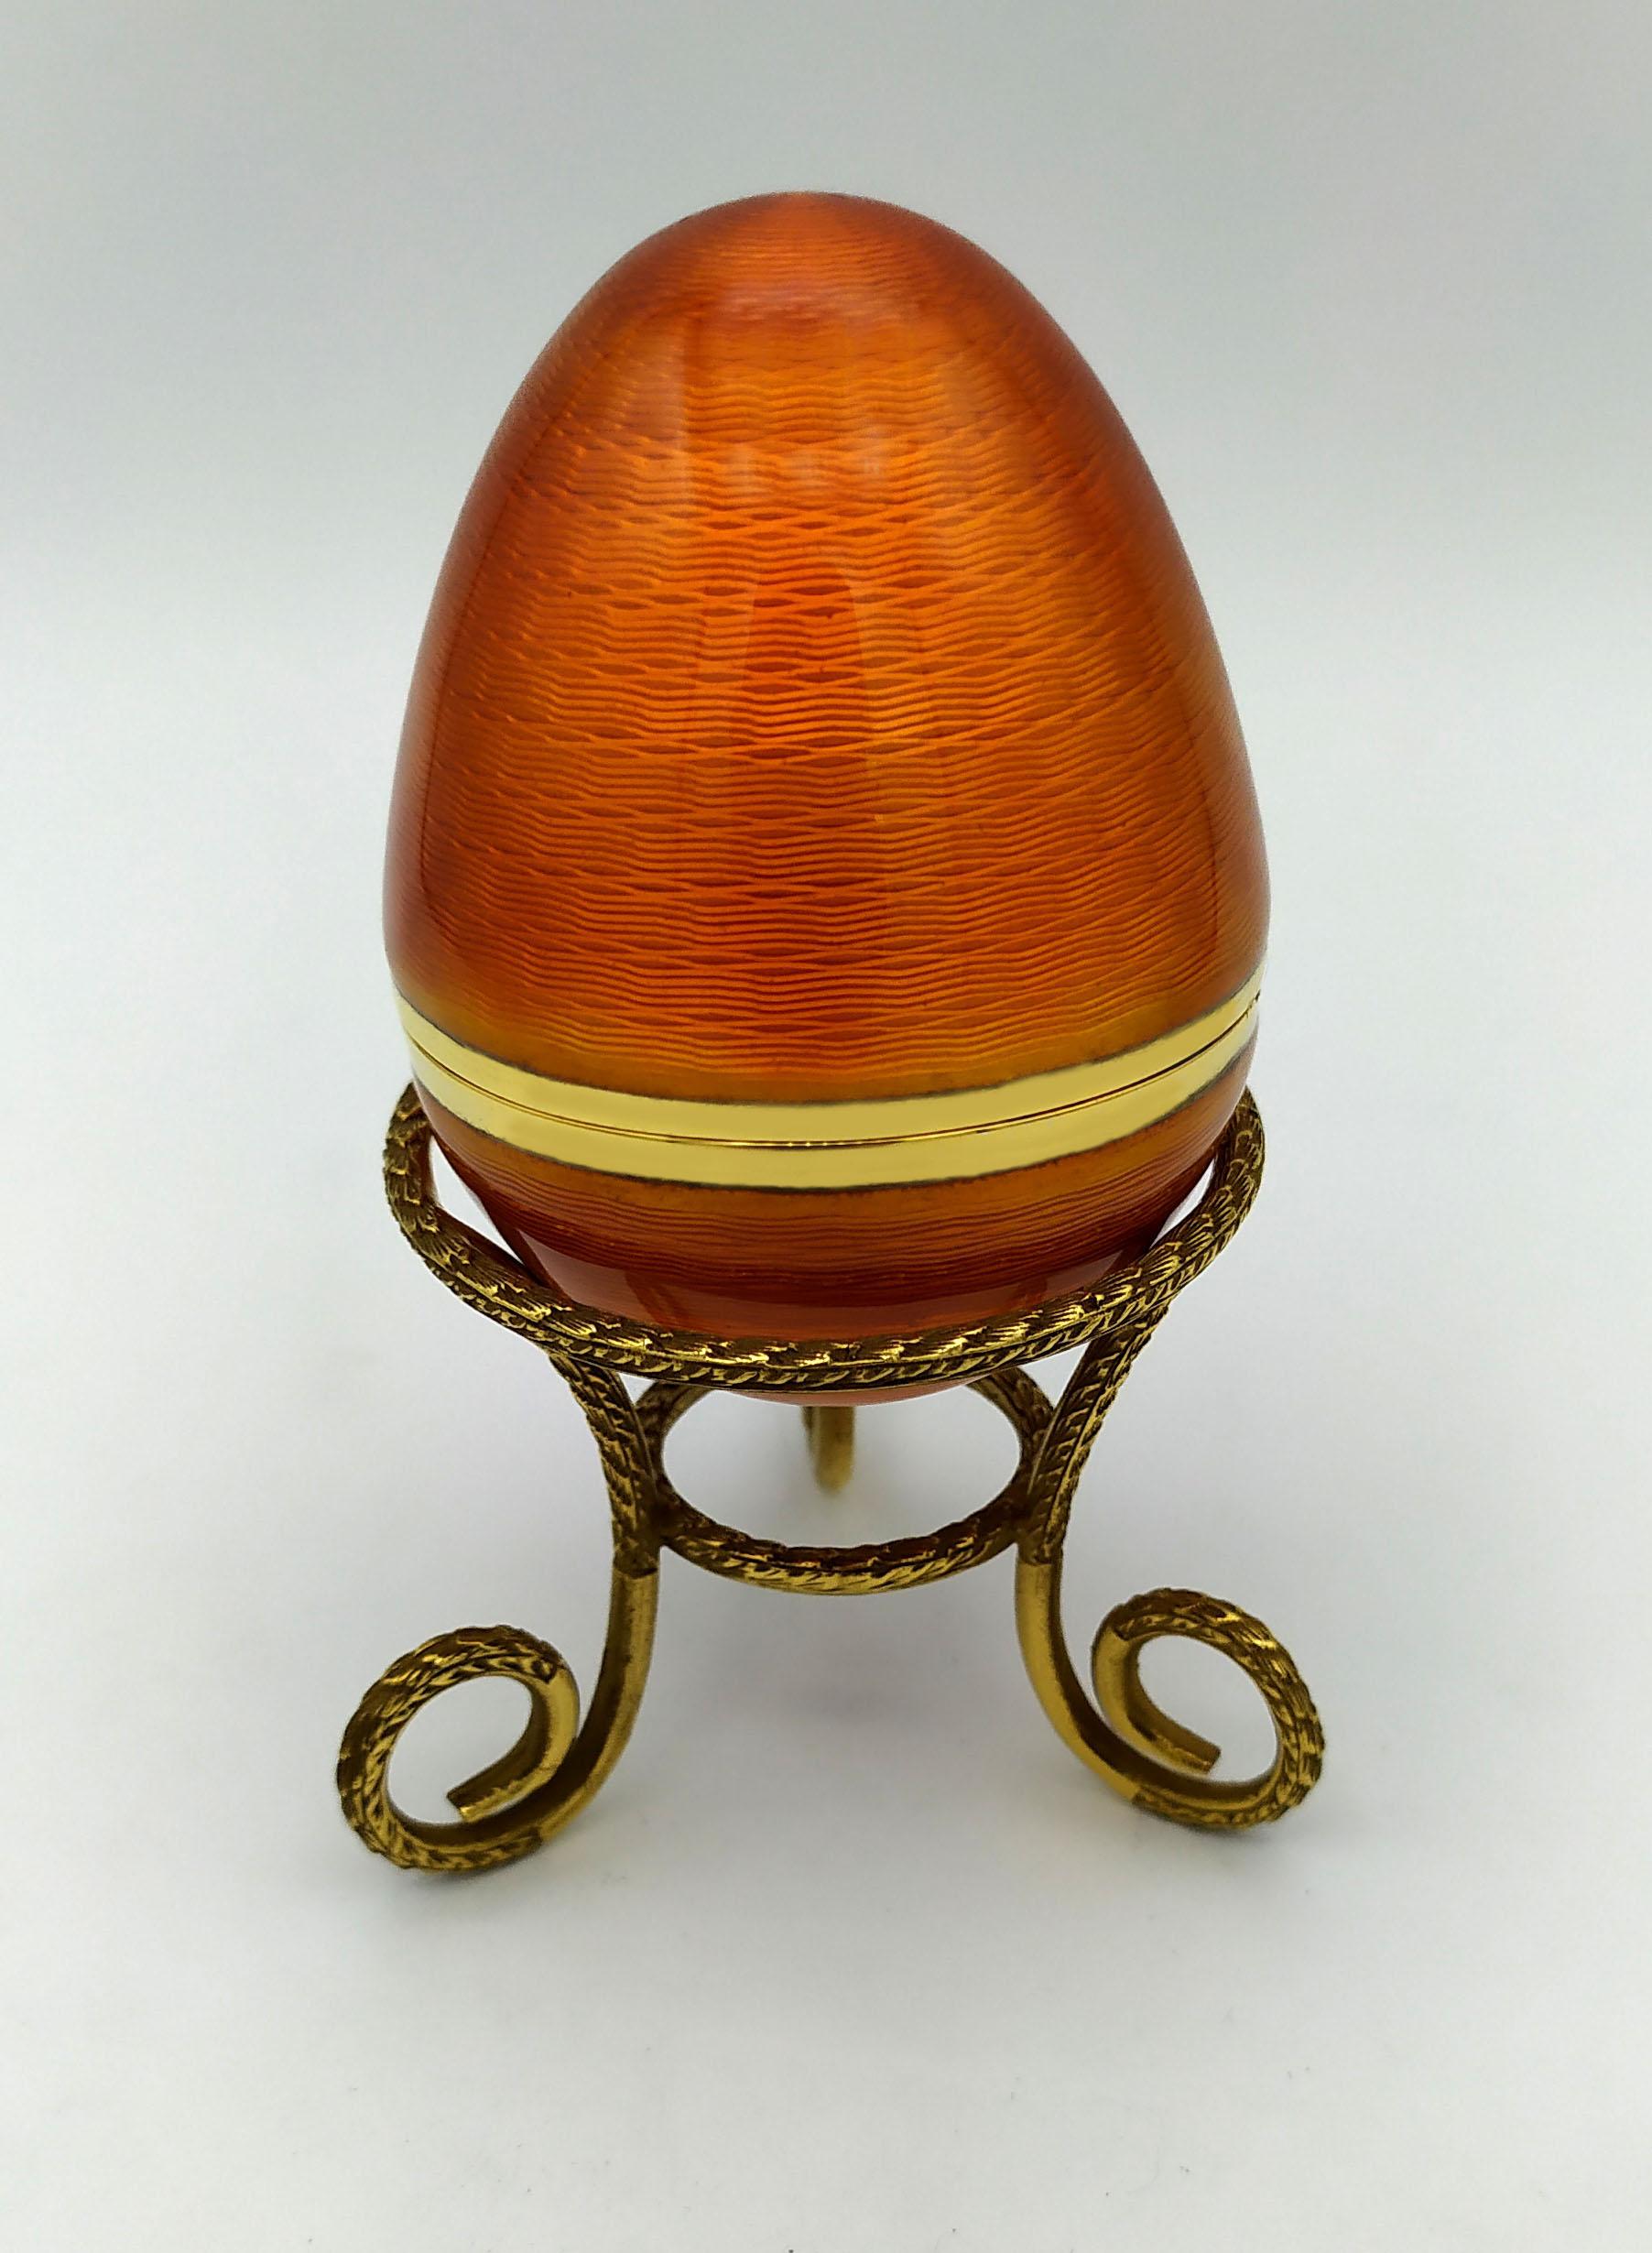 Egg on tripod in 925/1000 sterling silver gold plated with translucent fired enamel on guillochè, Russian Empire style inspired by Carl Fabergè eggs late 1800s, early 1900s. Measurements: diameter of the egg cm. 5 cm high. 6.8 resting on a